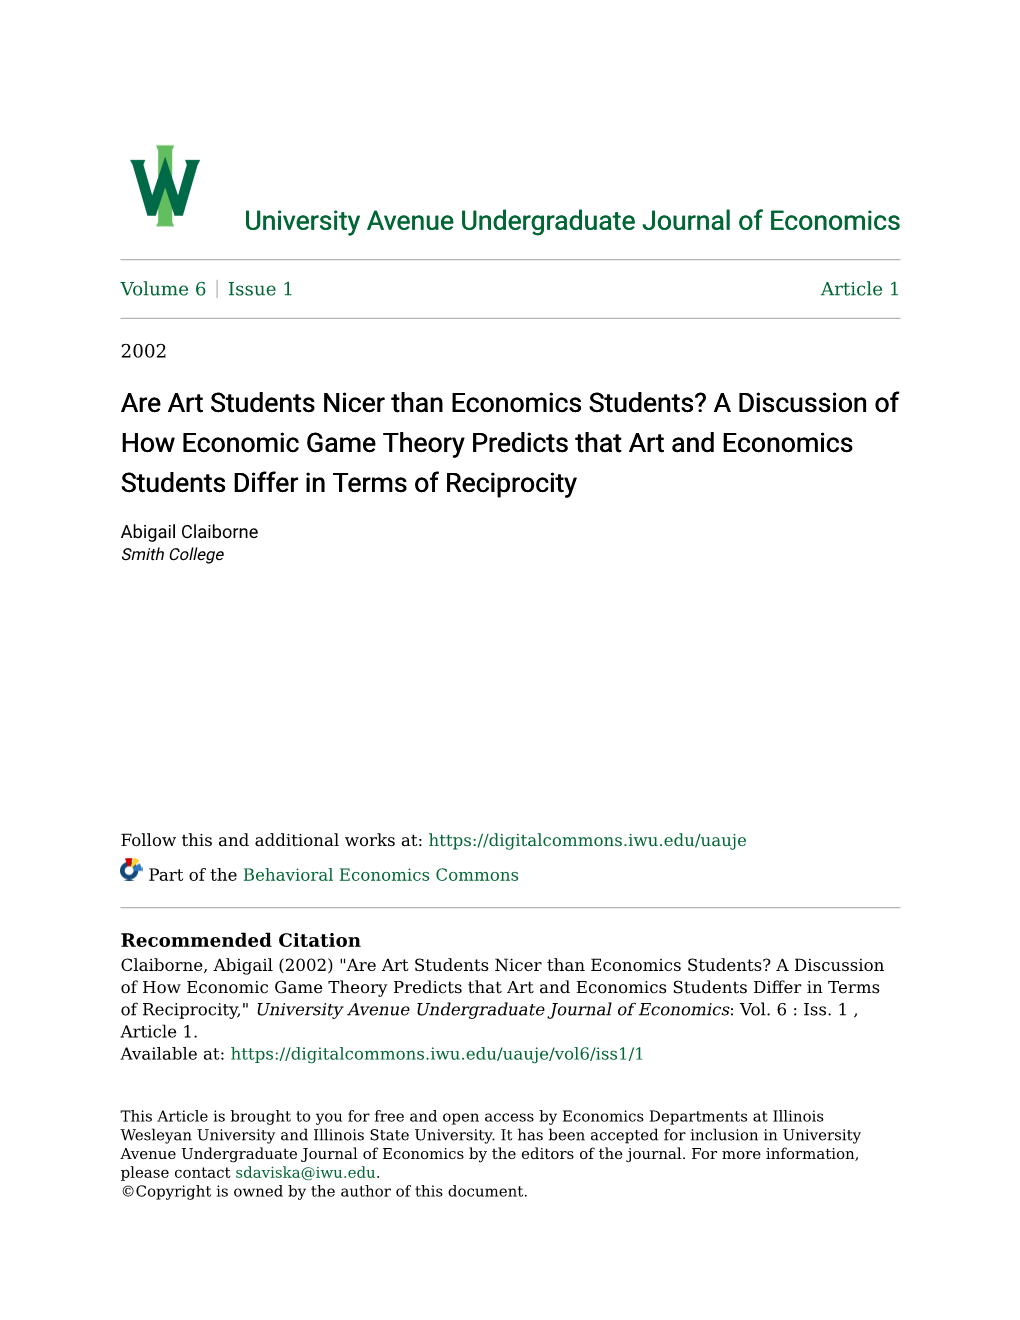 Are Art Students Nicer Than Economics Students? a Discussion of How Economic Game Theory Predicts That Art and Economics Students Differ in Terms of Reciprocity